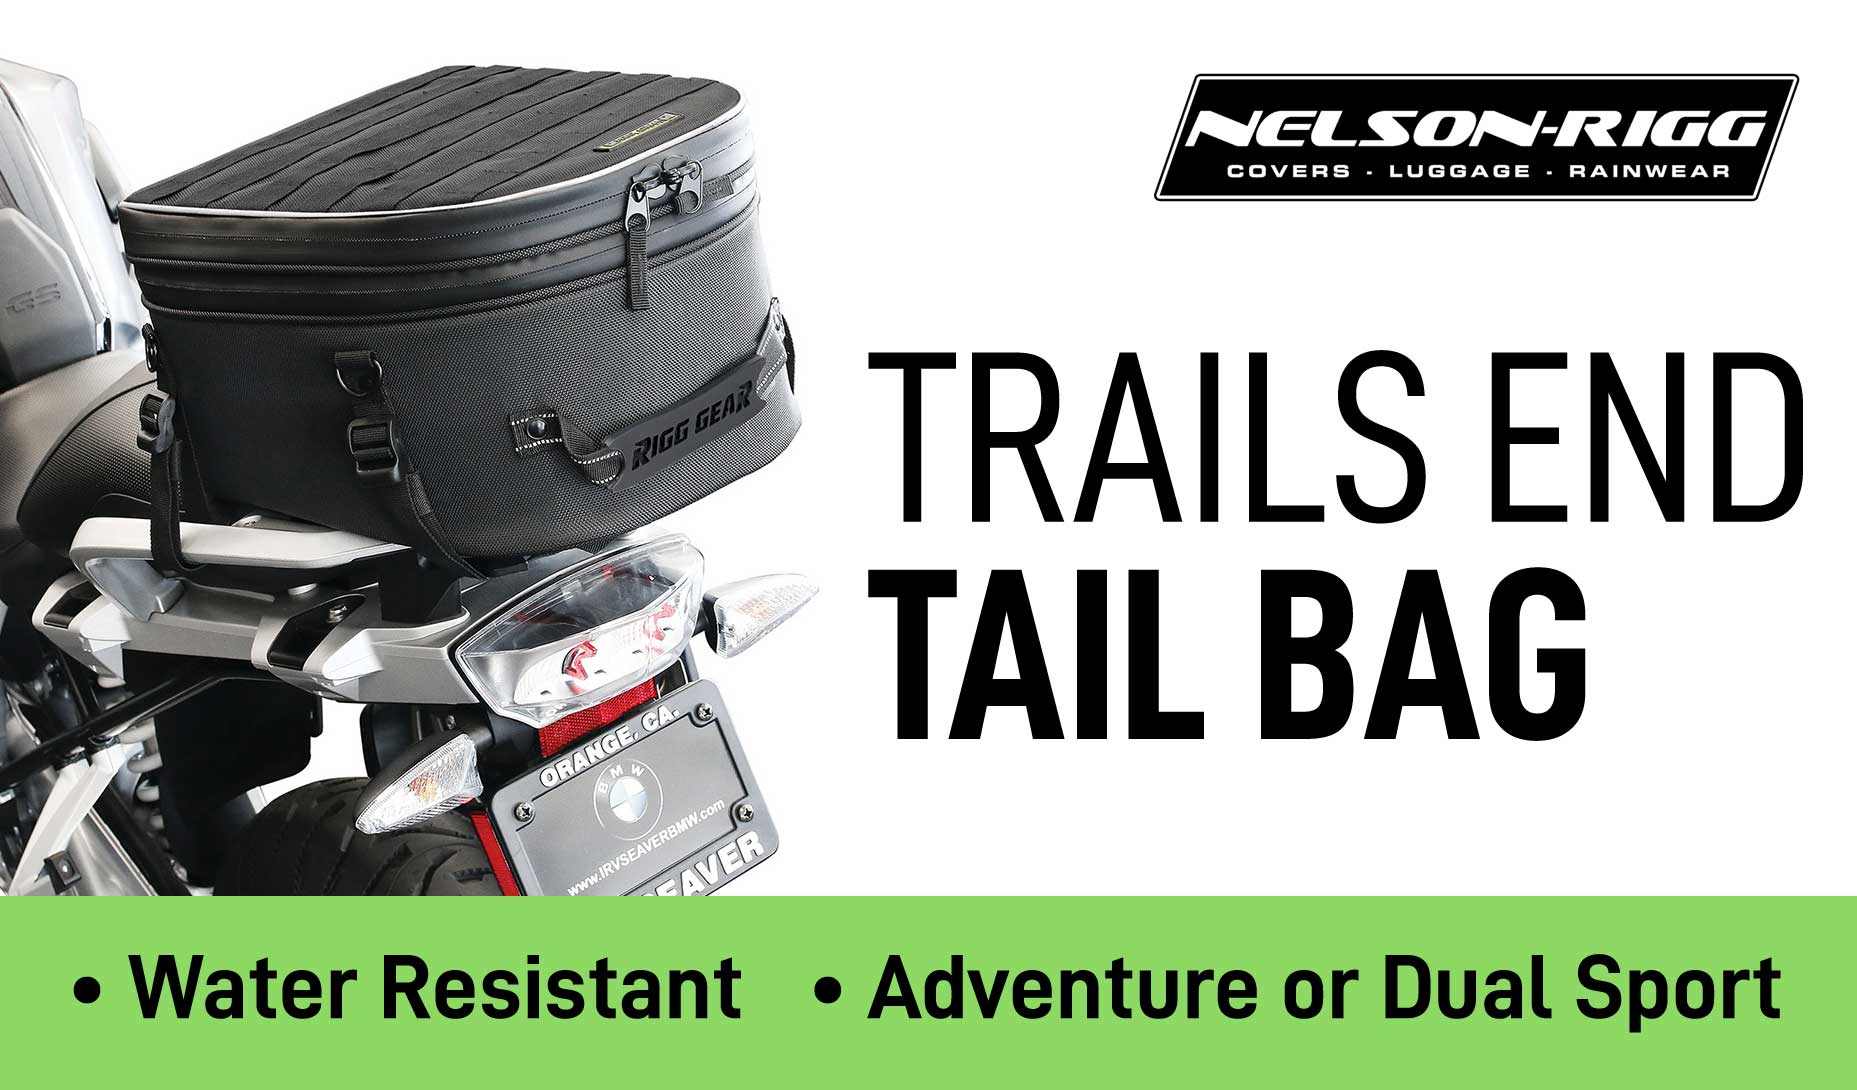 Nelson Rigg Trails End Tail Bag